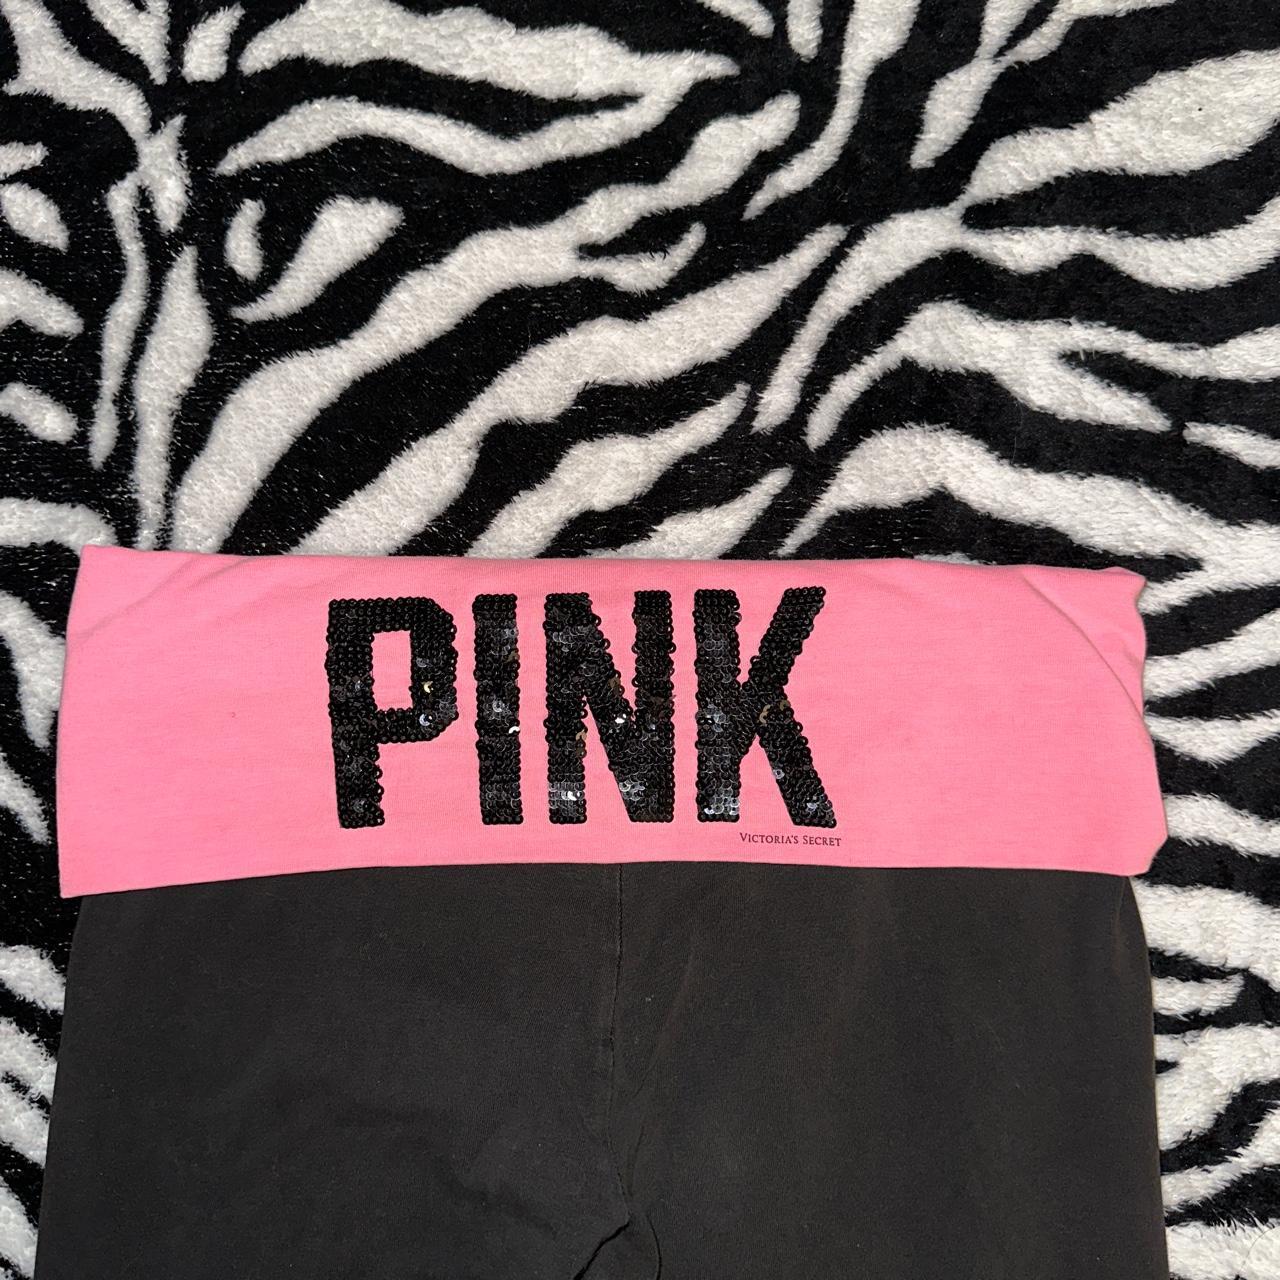 Victoria's Secret PINK fold over flare yoga pants - Depop  Victoria  secret pink yoga pants, Fold over yoga pants, Outfits with leggings